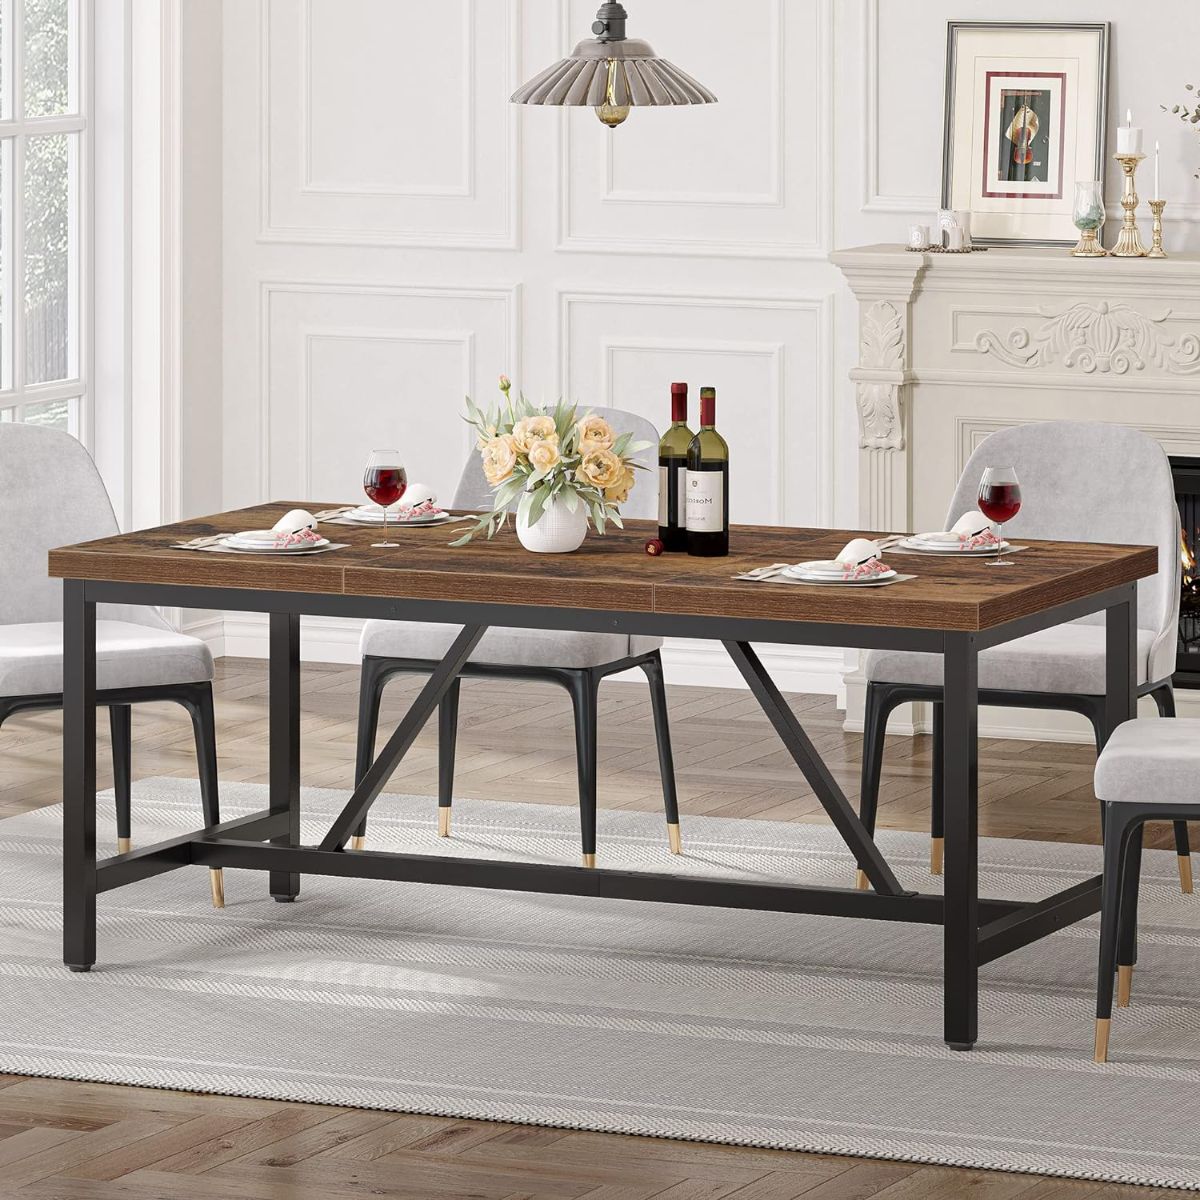 70.8” Large Kitchen Dining Room Table